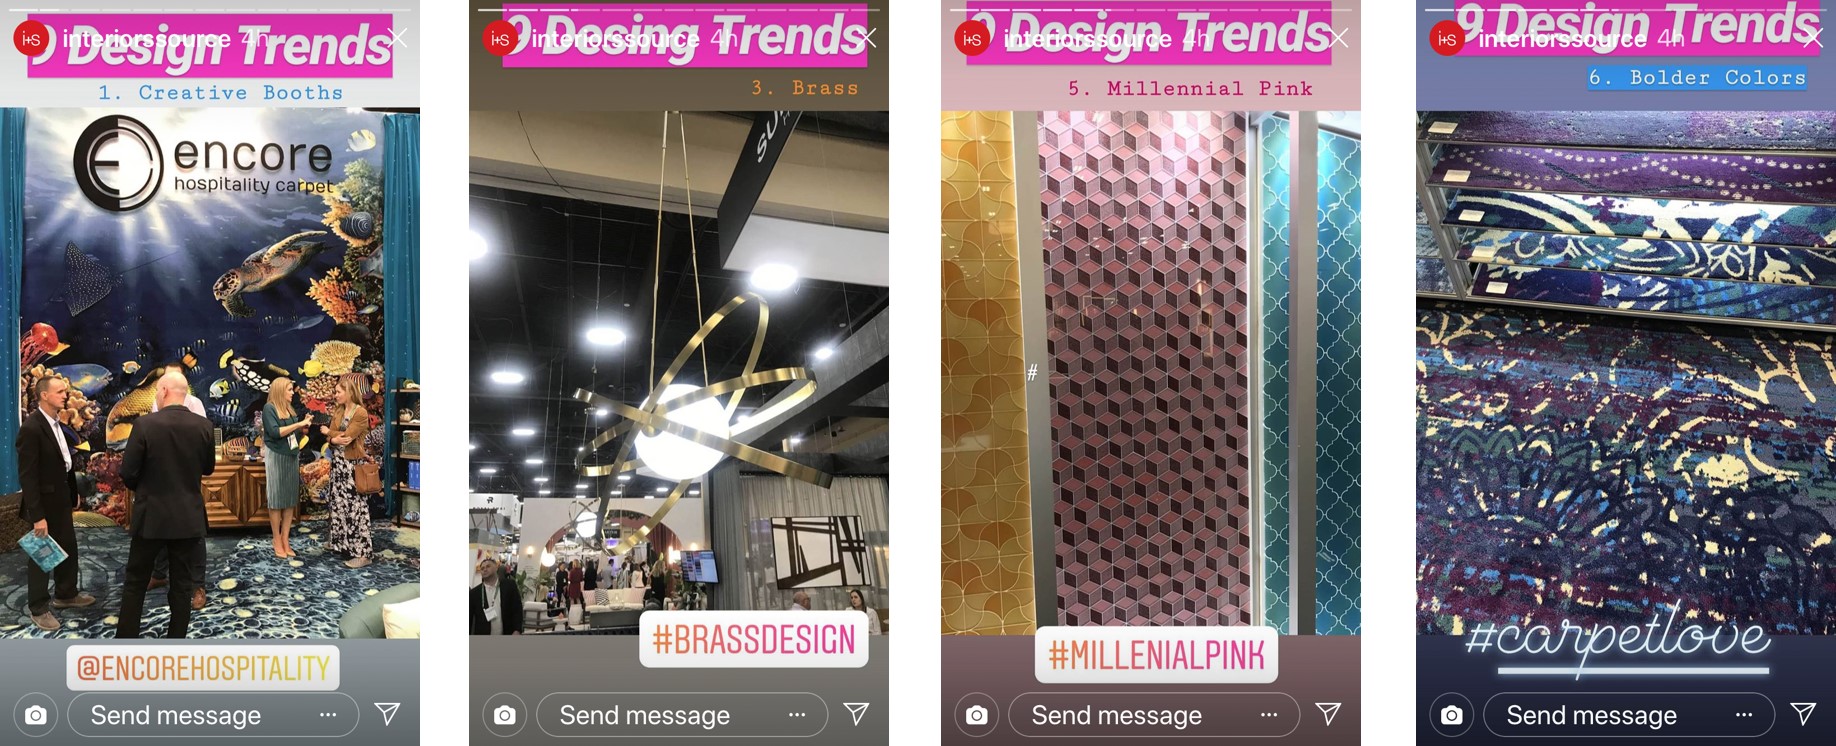 Design Trends from Interiors and Sources Instagram Stories